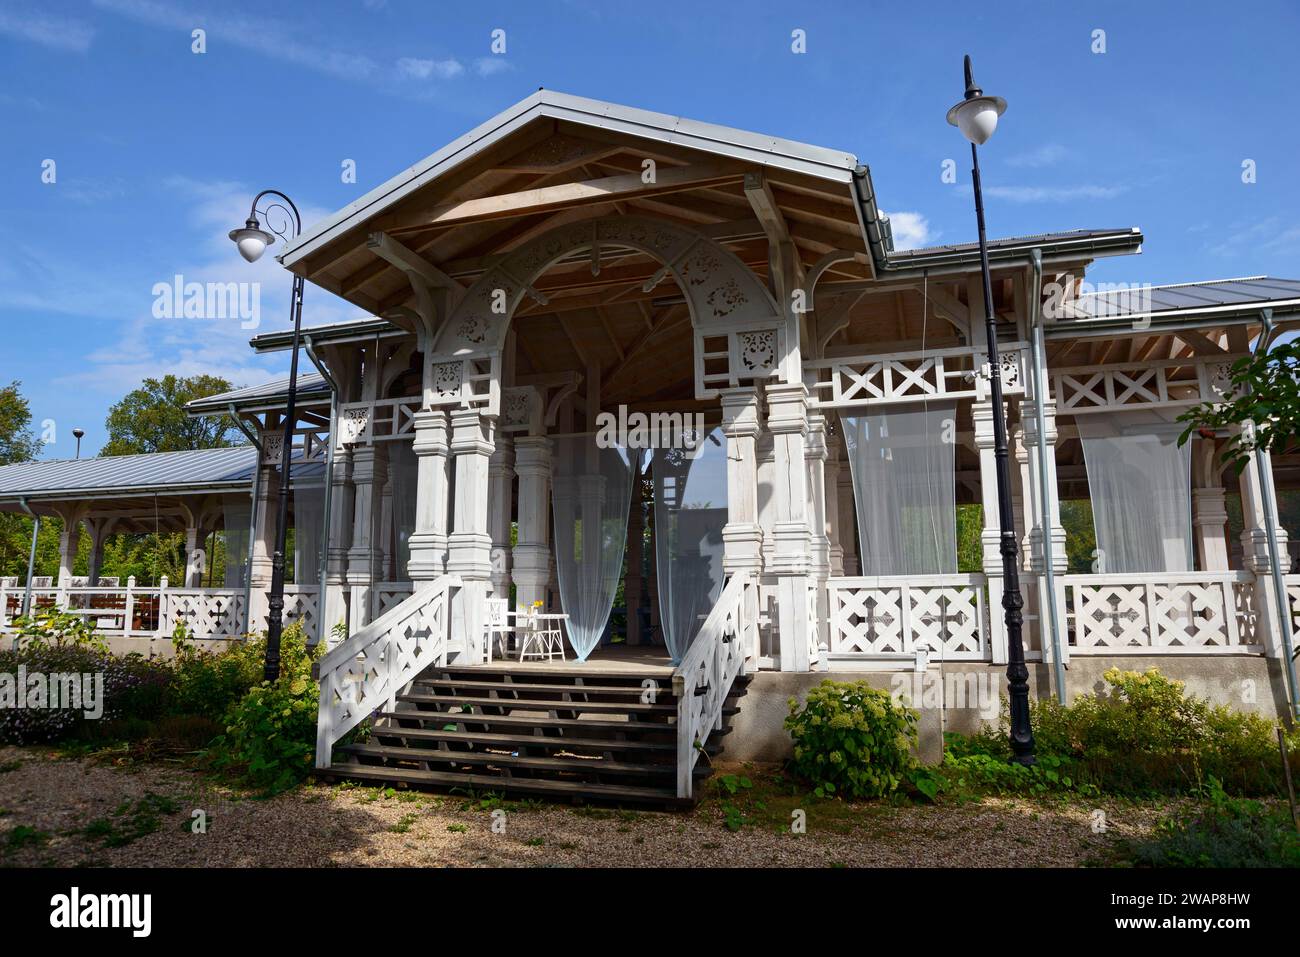 An elegant wooden veranda with white columns and stairs, surrounded by plants under a blue sky, Old railway station Bialowieza Towarowa, built for Rus Stock Photo